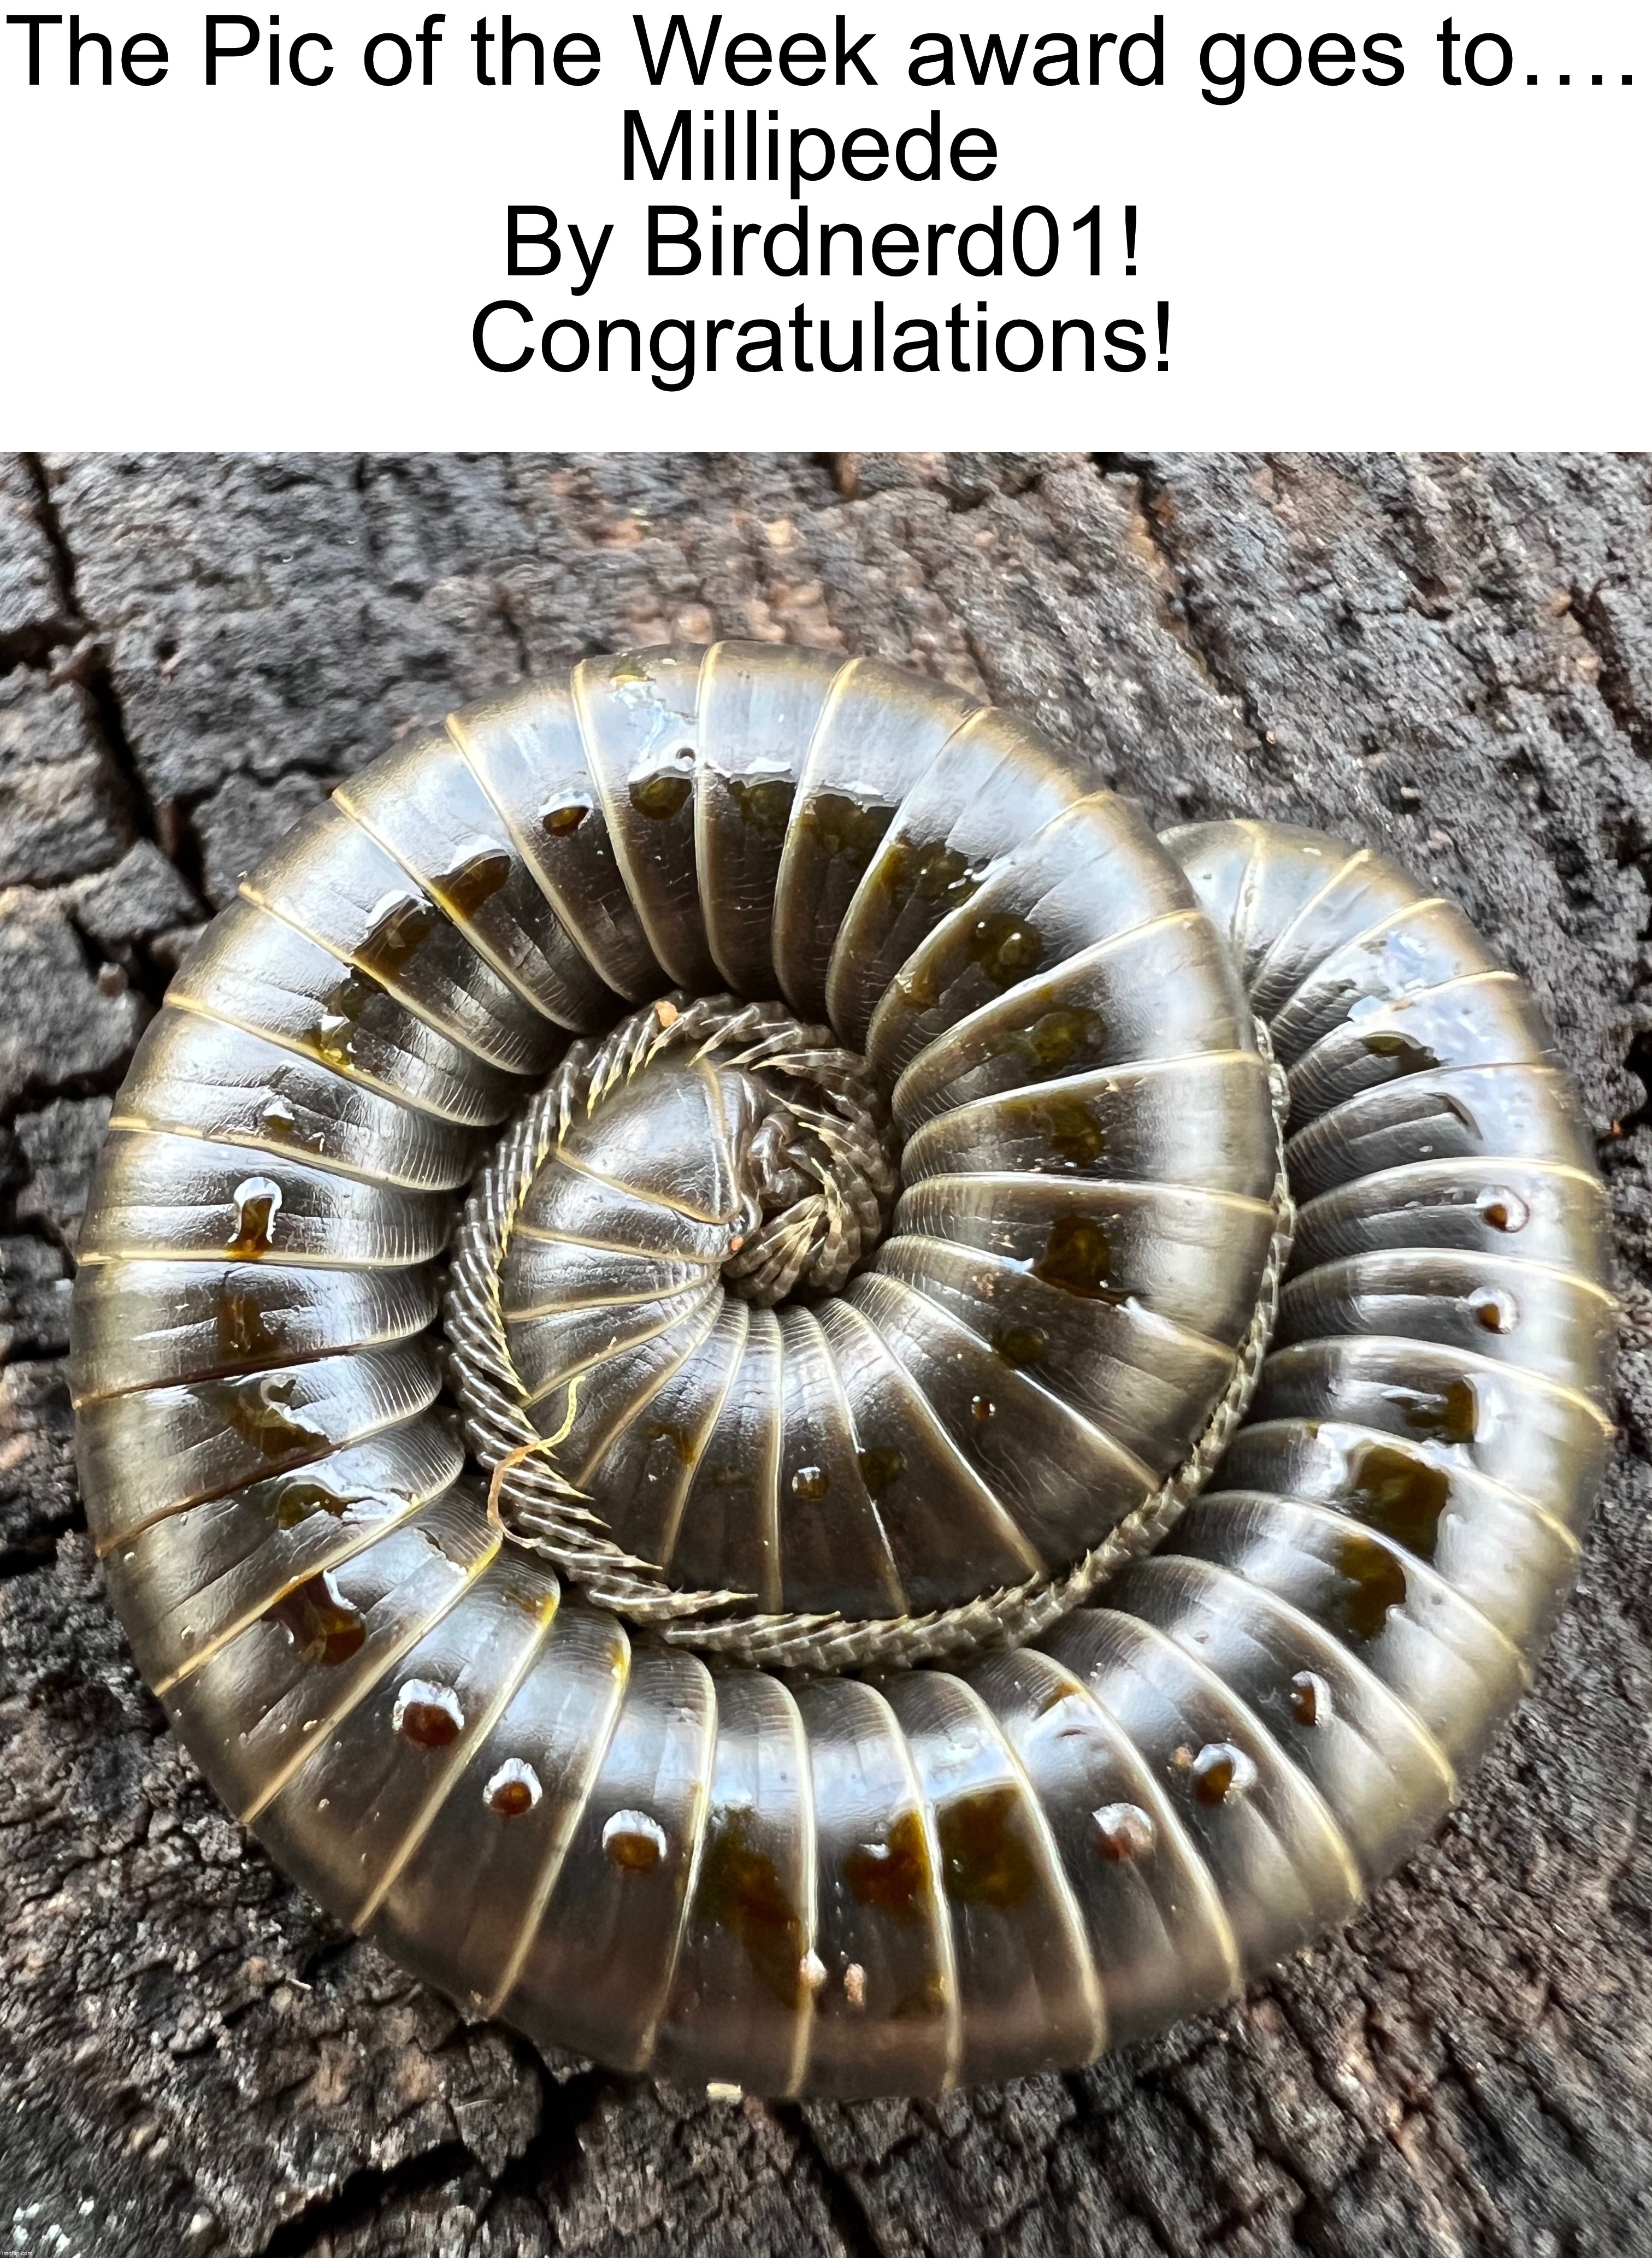 Millipede by @Birdnerd01 https://imgflip.com/i/7hftbr | The Pic of the Week award goes to….
Millipede 
By Birdnerd01!
Congratulations! | image tagged in share your own photos | made w/ Imgflip meme maker